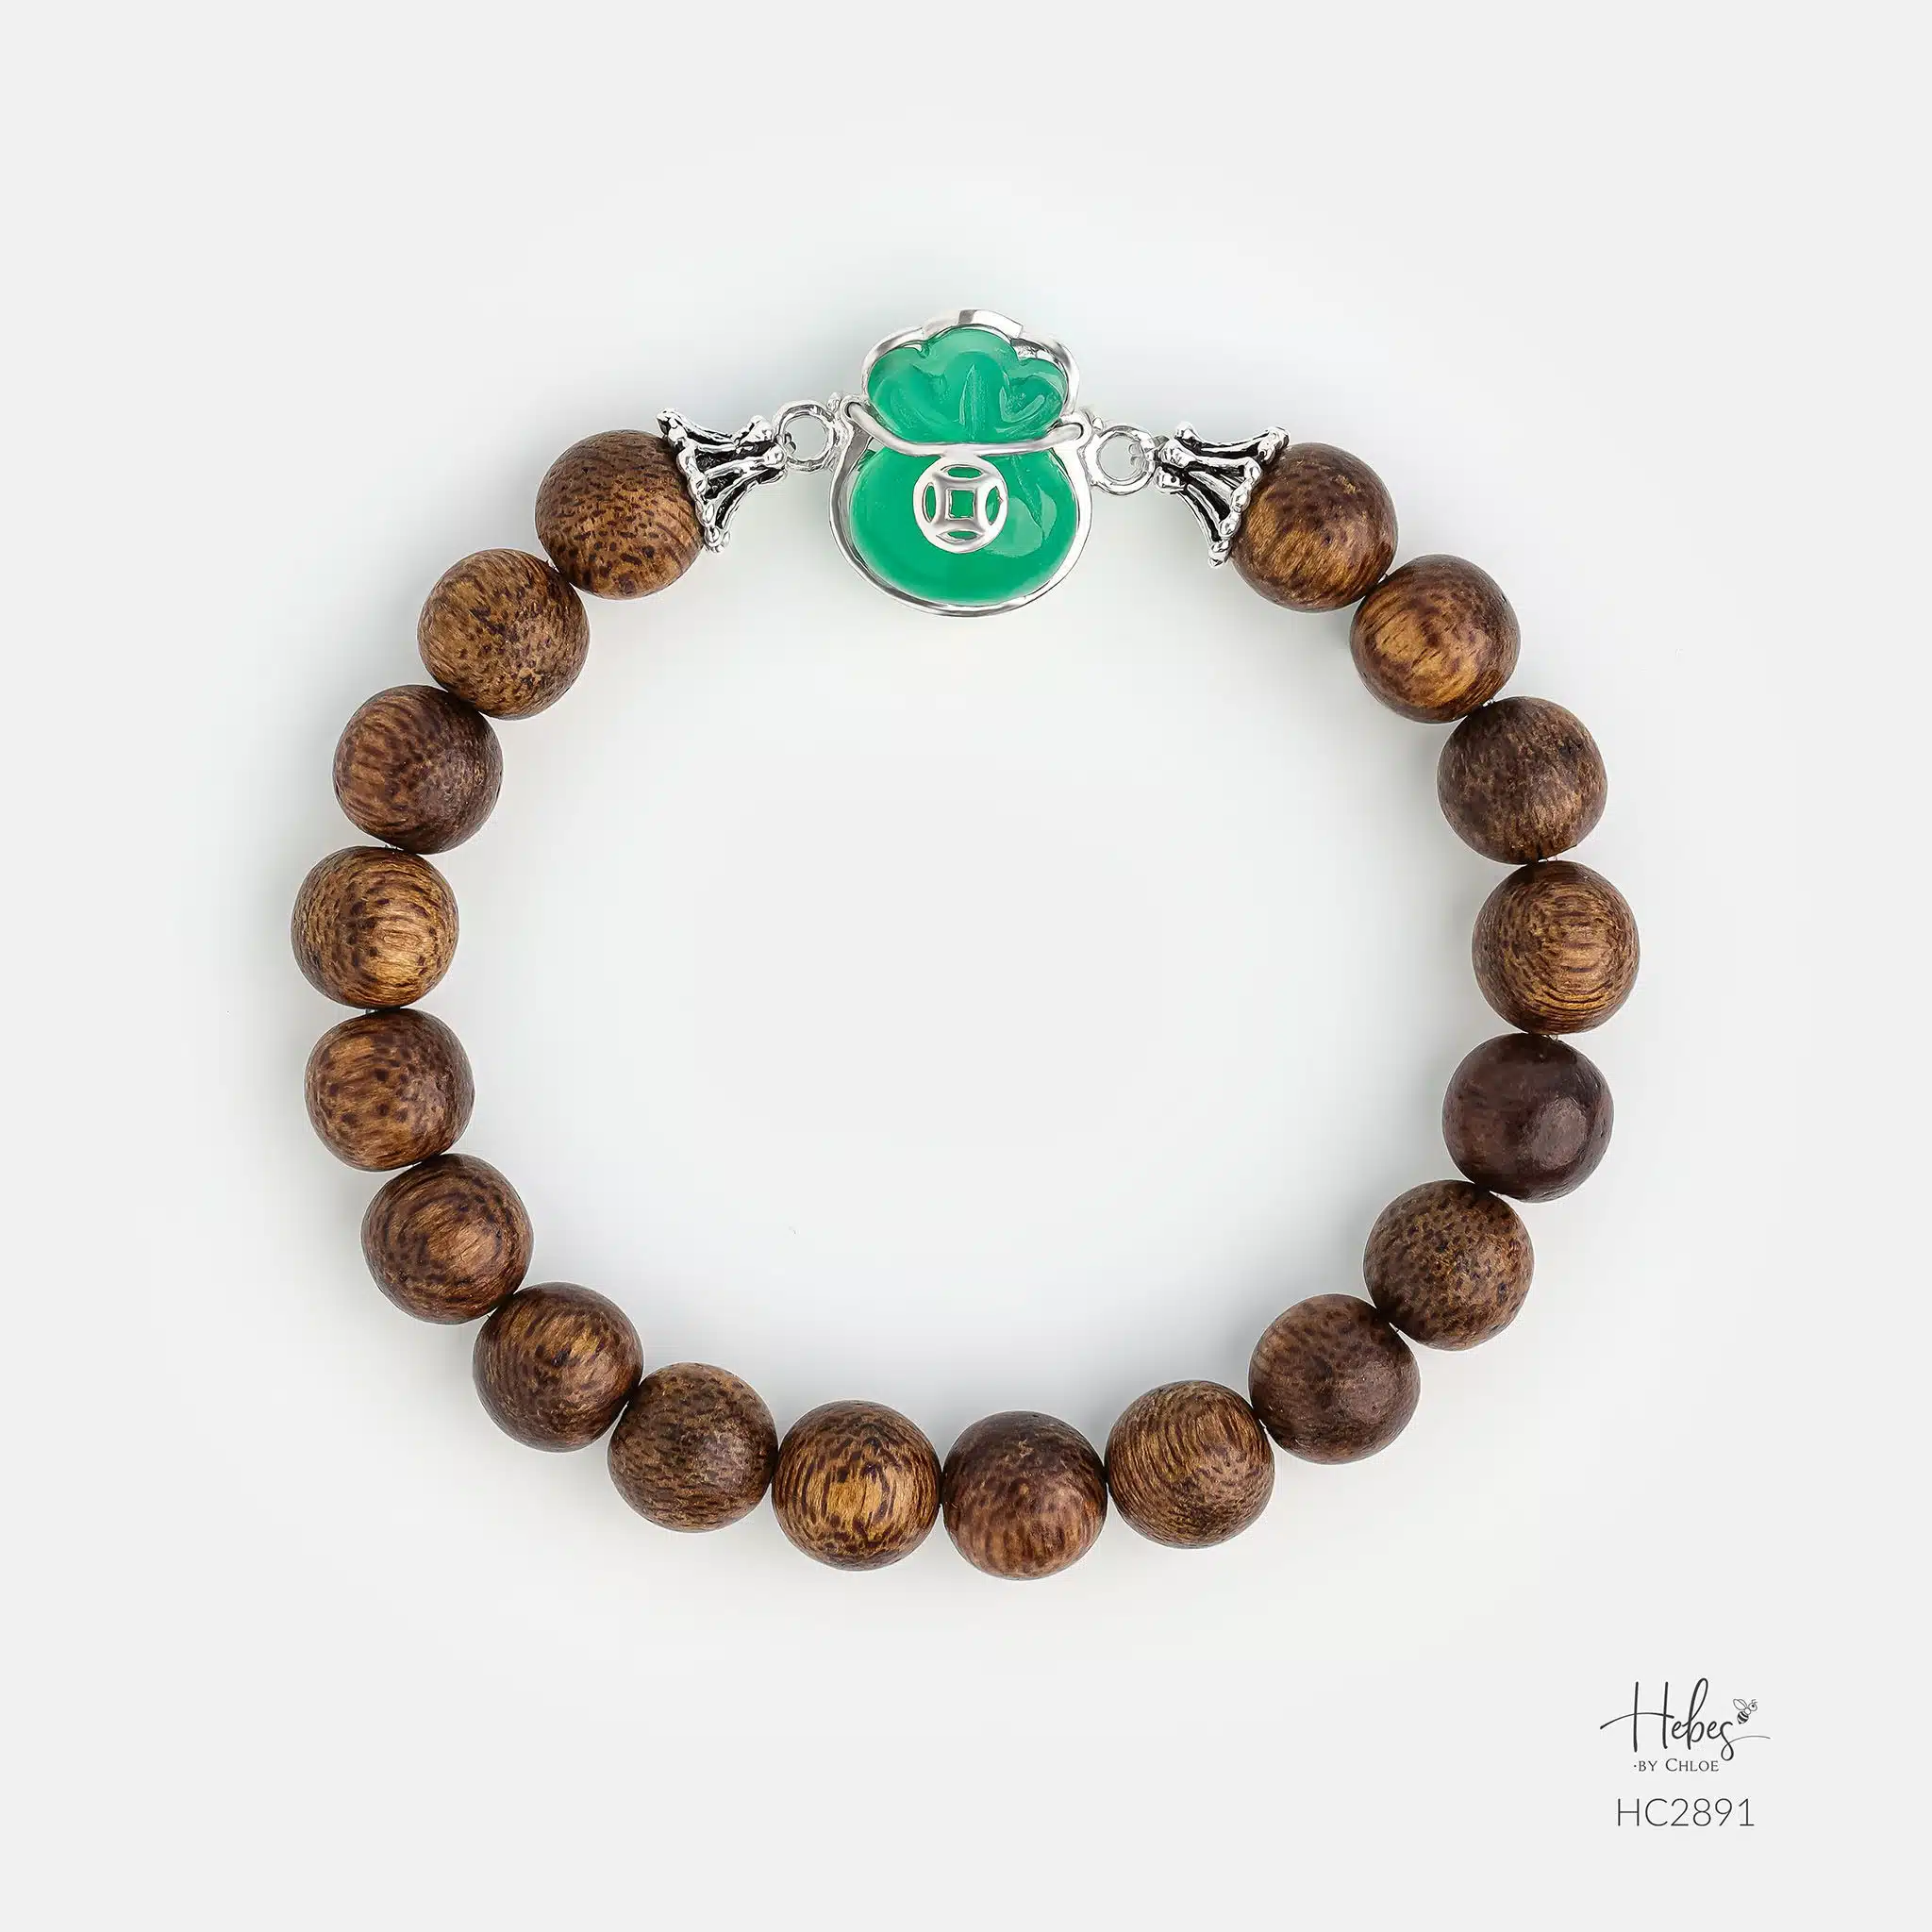 Gentle jade tones ripple from the central money bag pendant of this beautiful agarwood bracelet